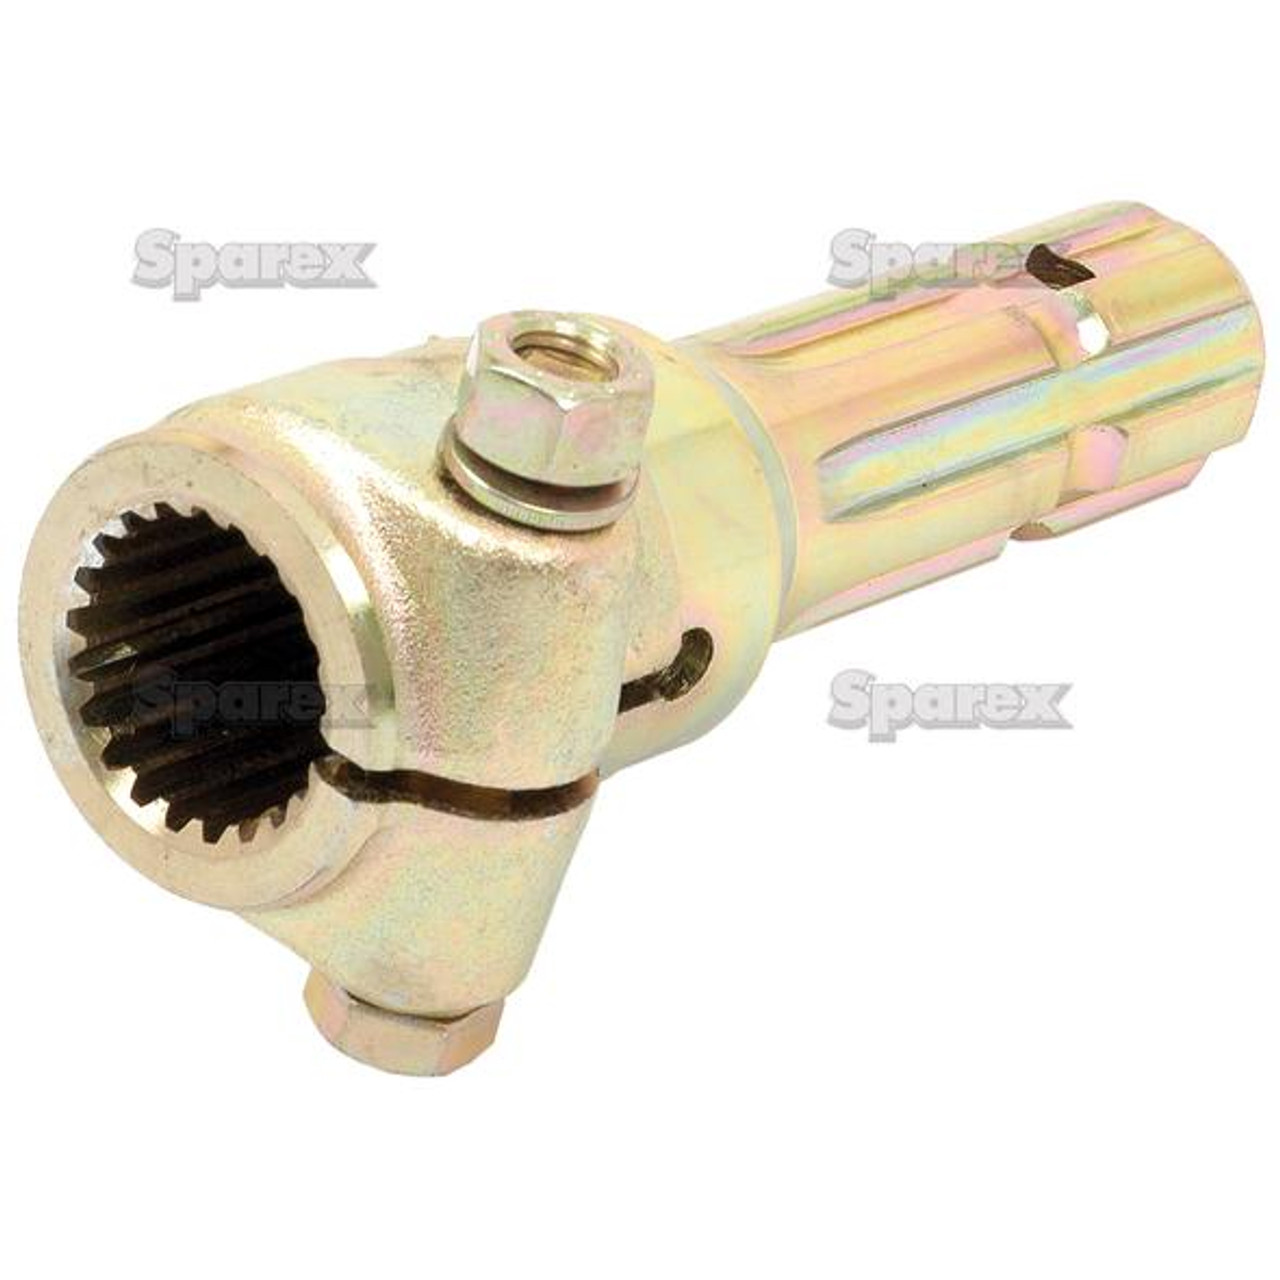 Tractor  PTO ADAPTOR, 1 3/8"-21 X 1 3/8", 6 BOLT Part Number S3743